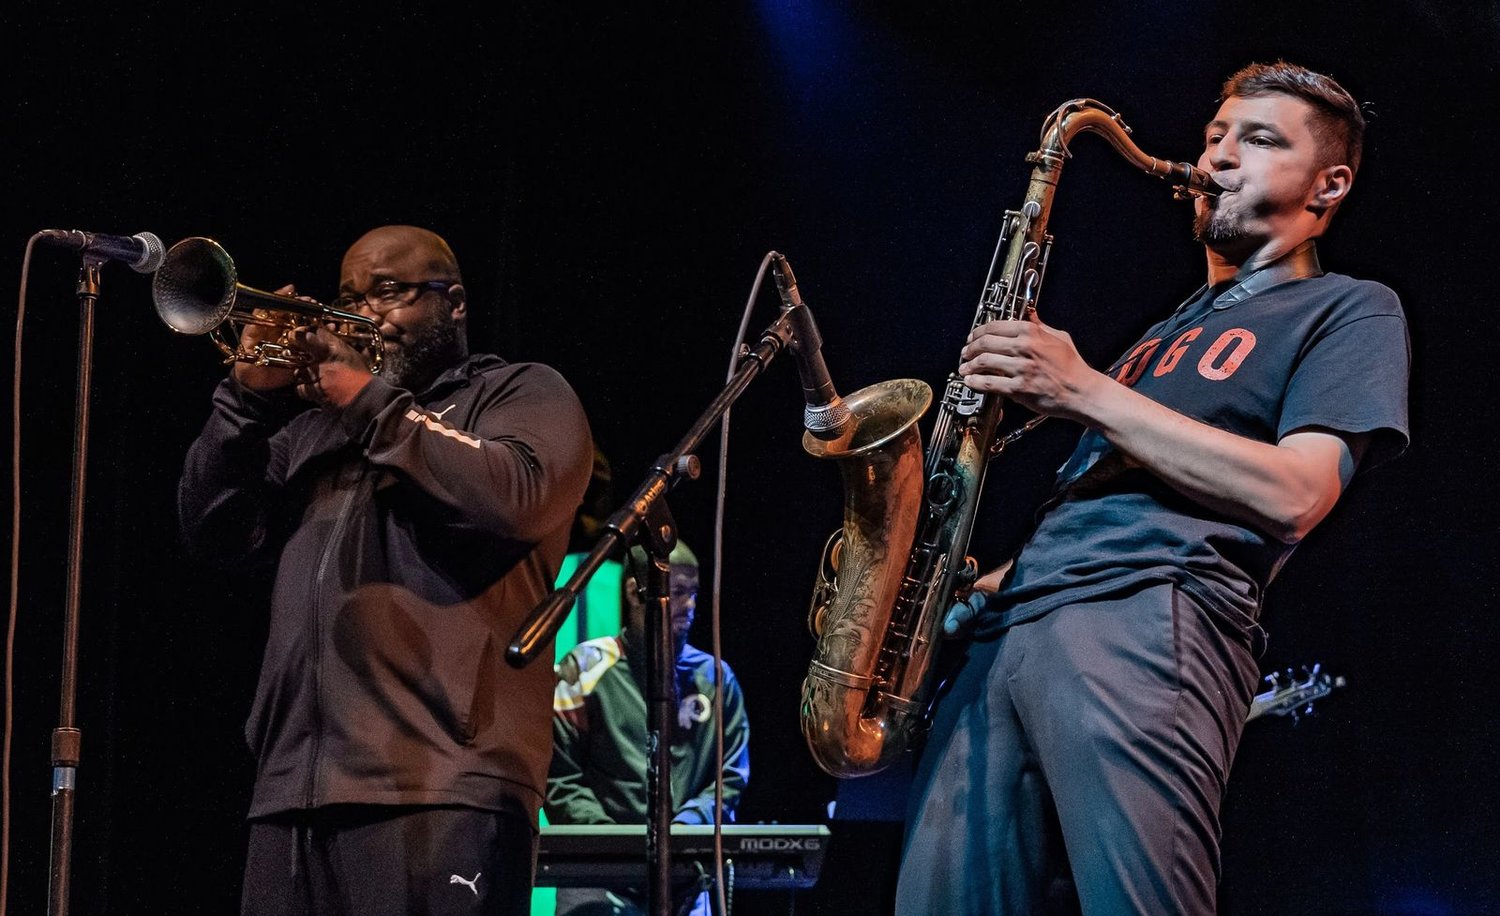 Led by saxophonist Elijah Jamal Balbed (right), The JoGo Project will entertain the audience with its mix of jazz and go-go music on September 19.